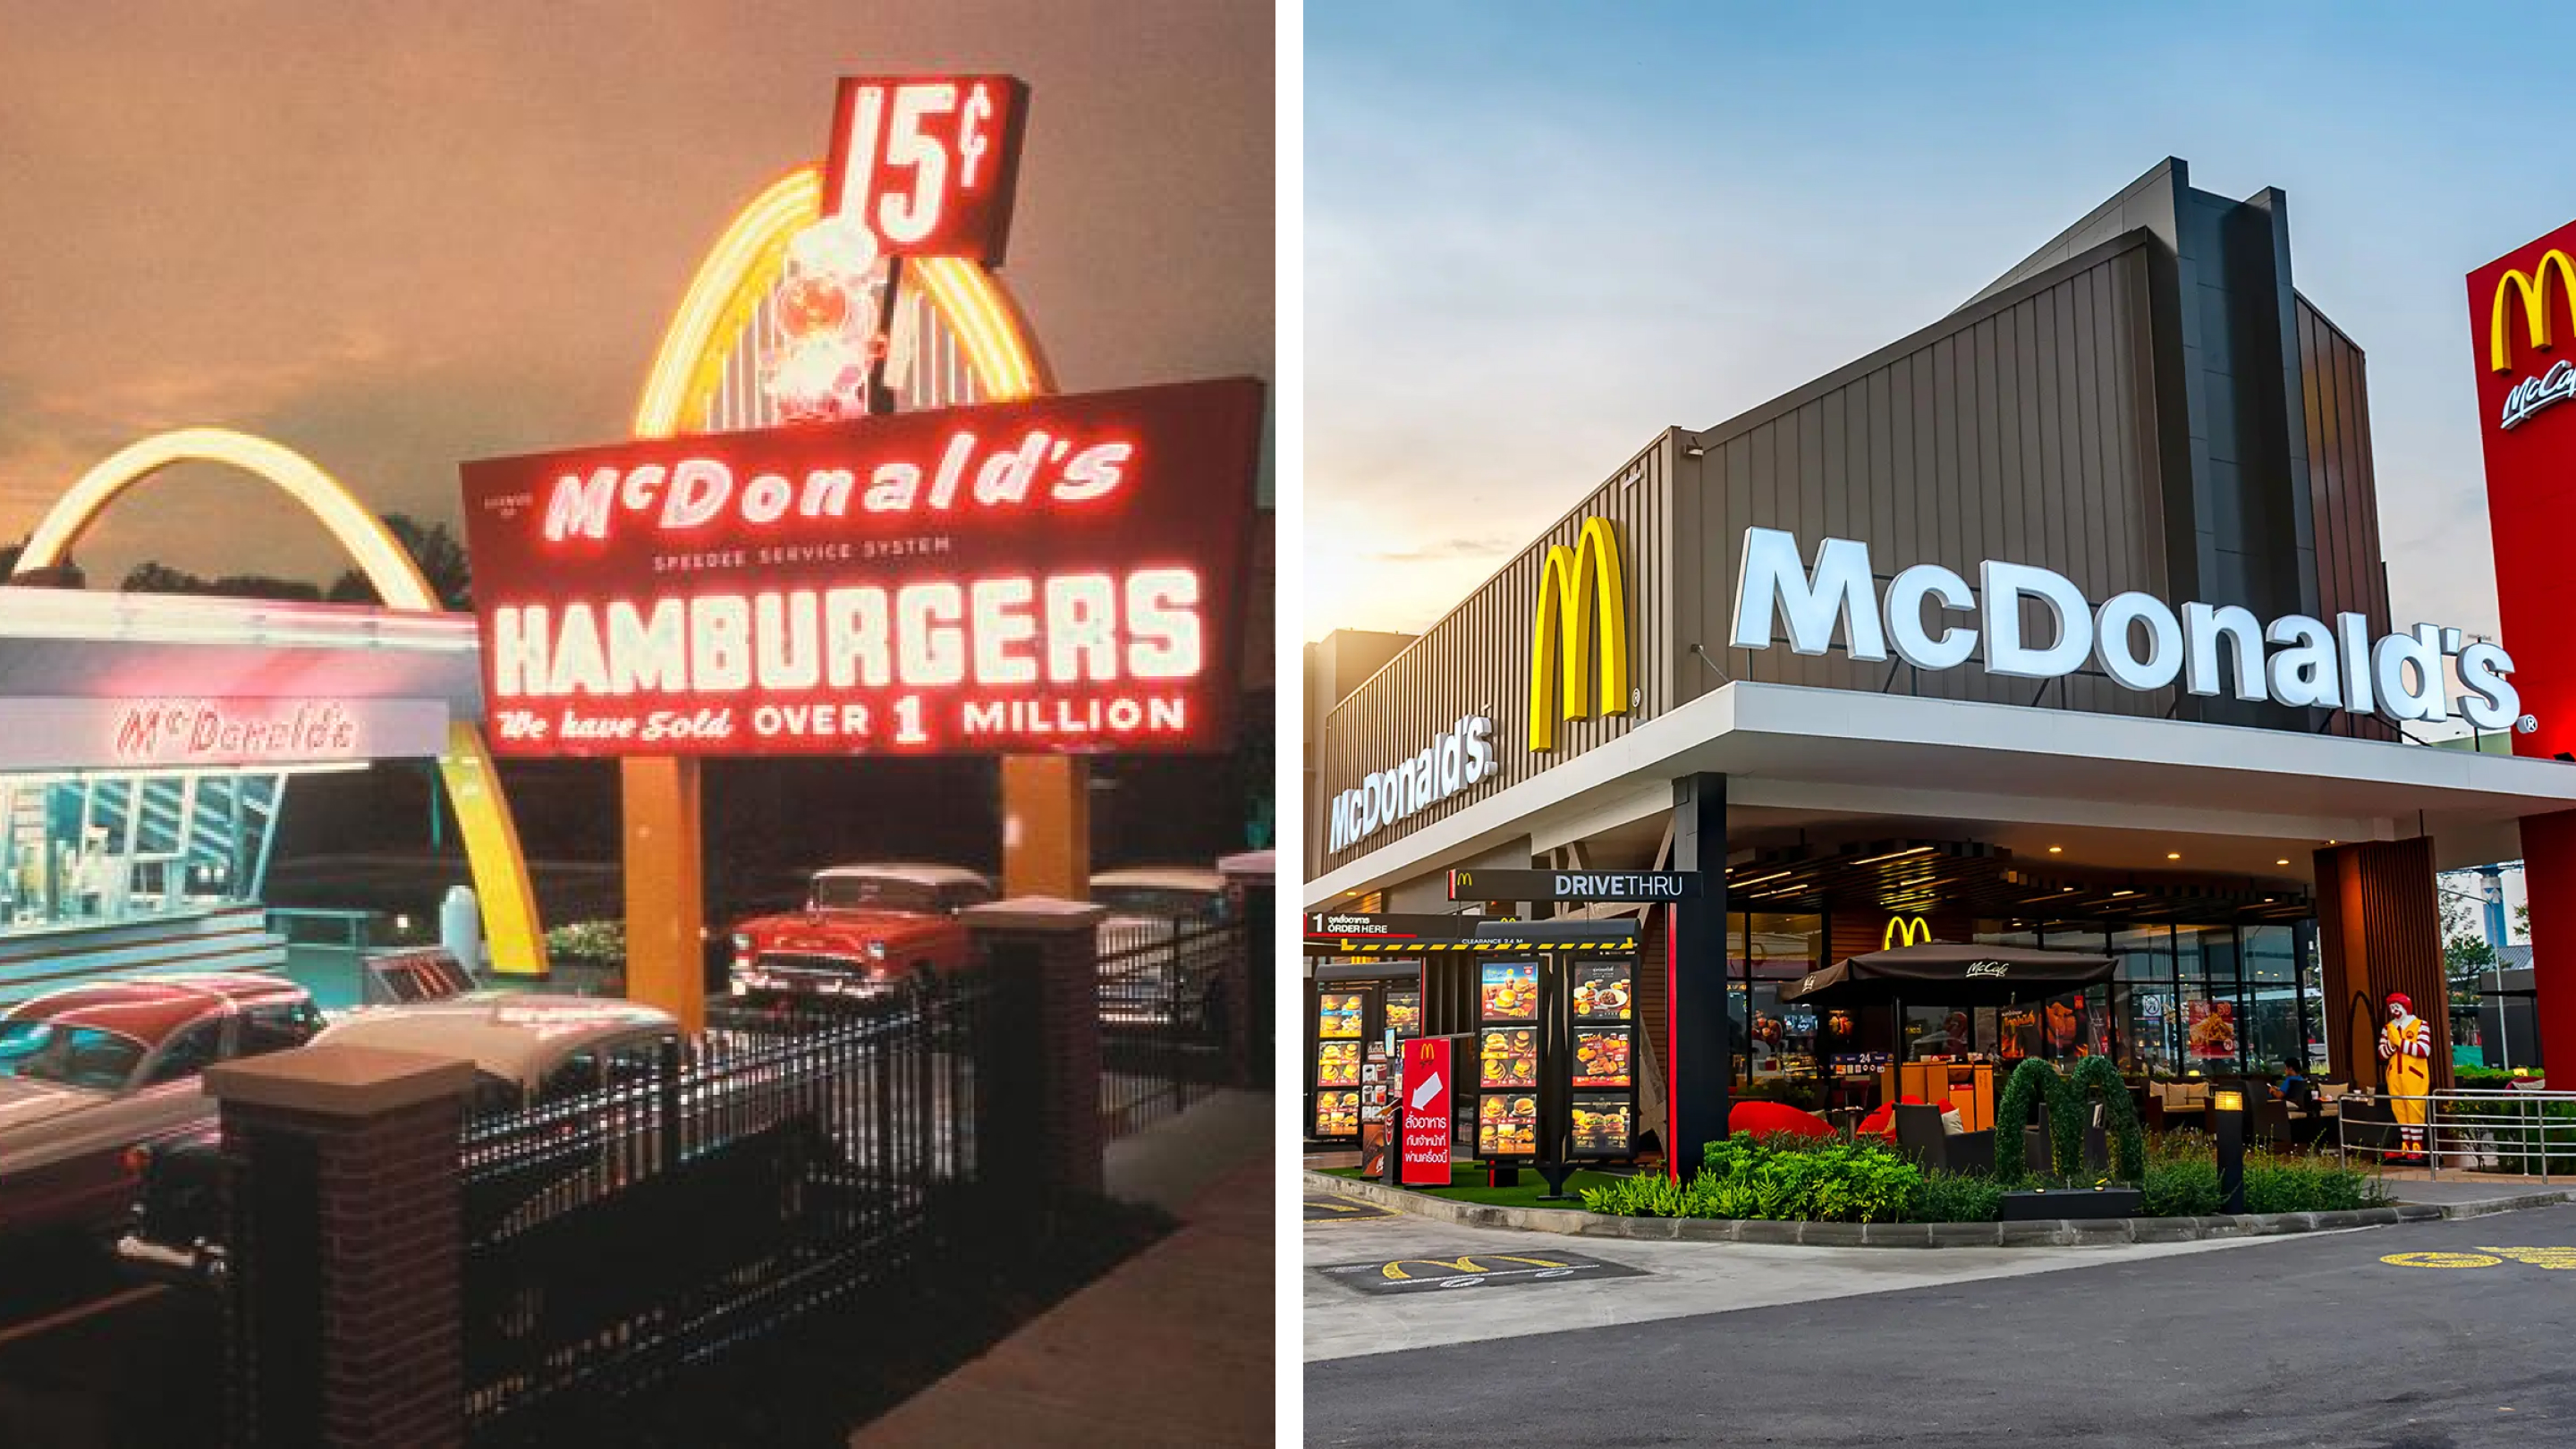 McDonald's: then and now